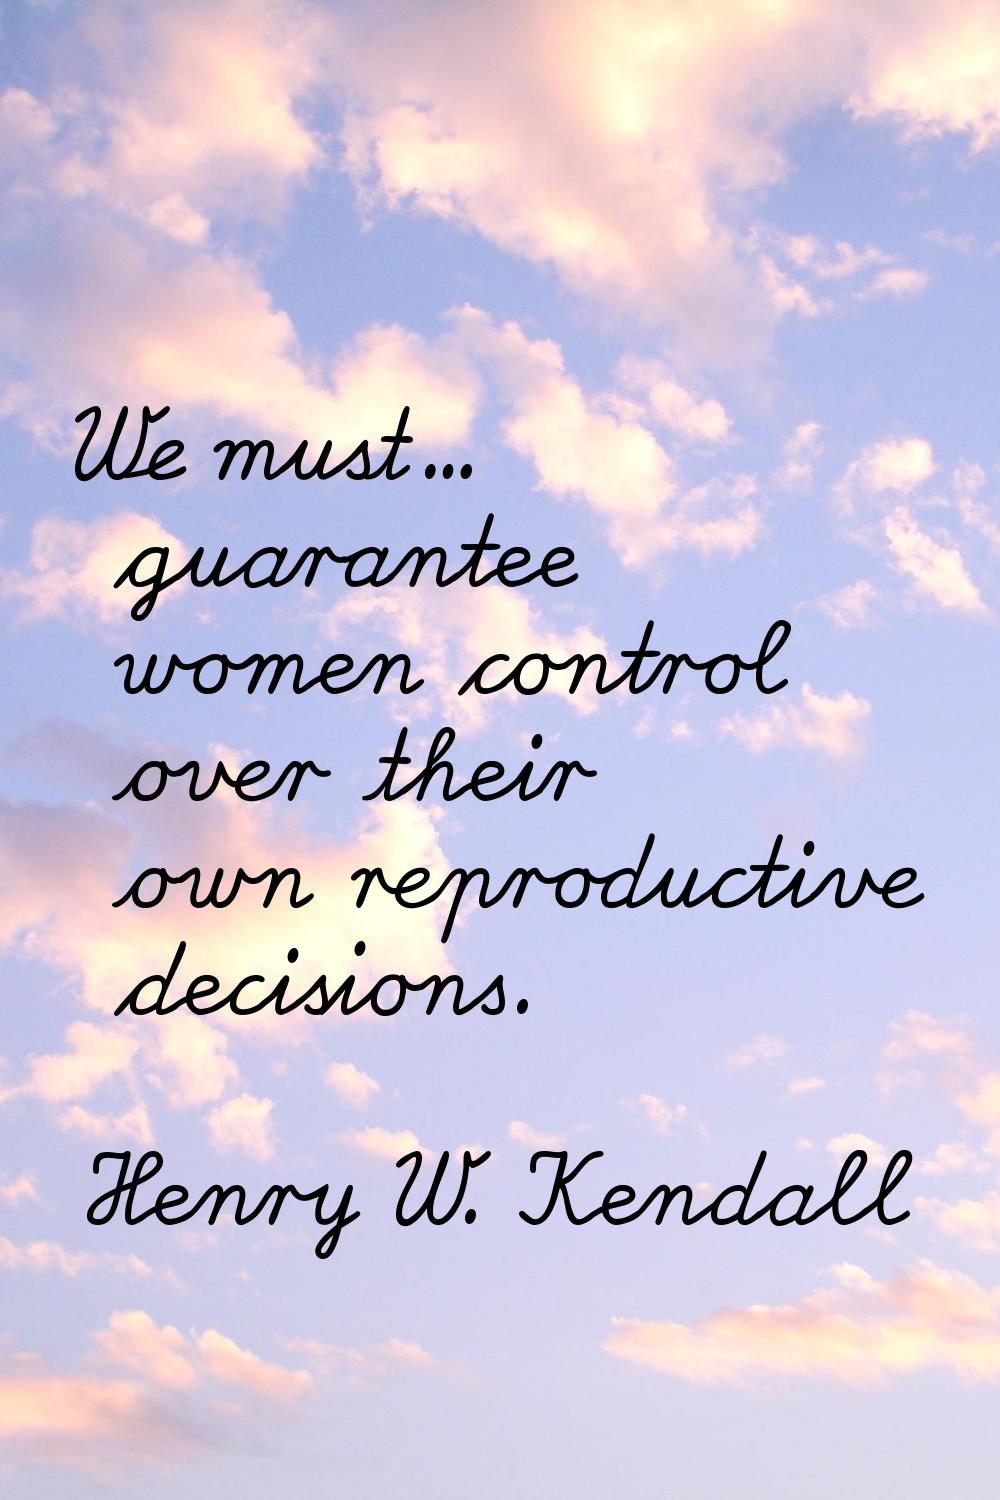 We must... guarantee women control over their own reproductive decisions.